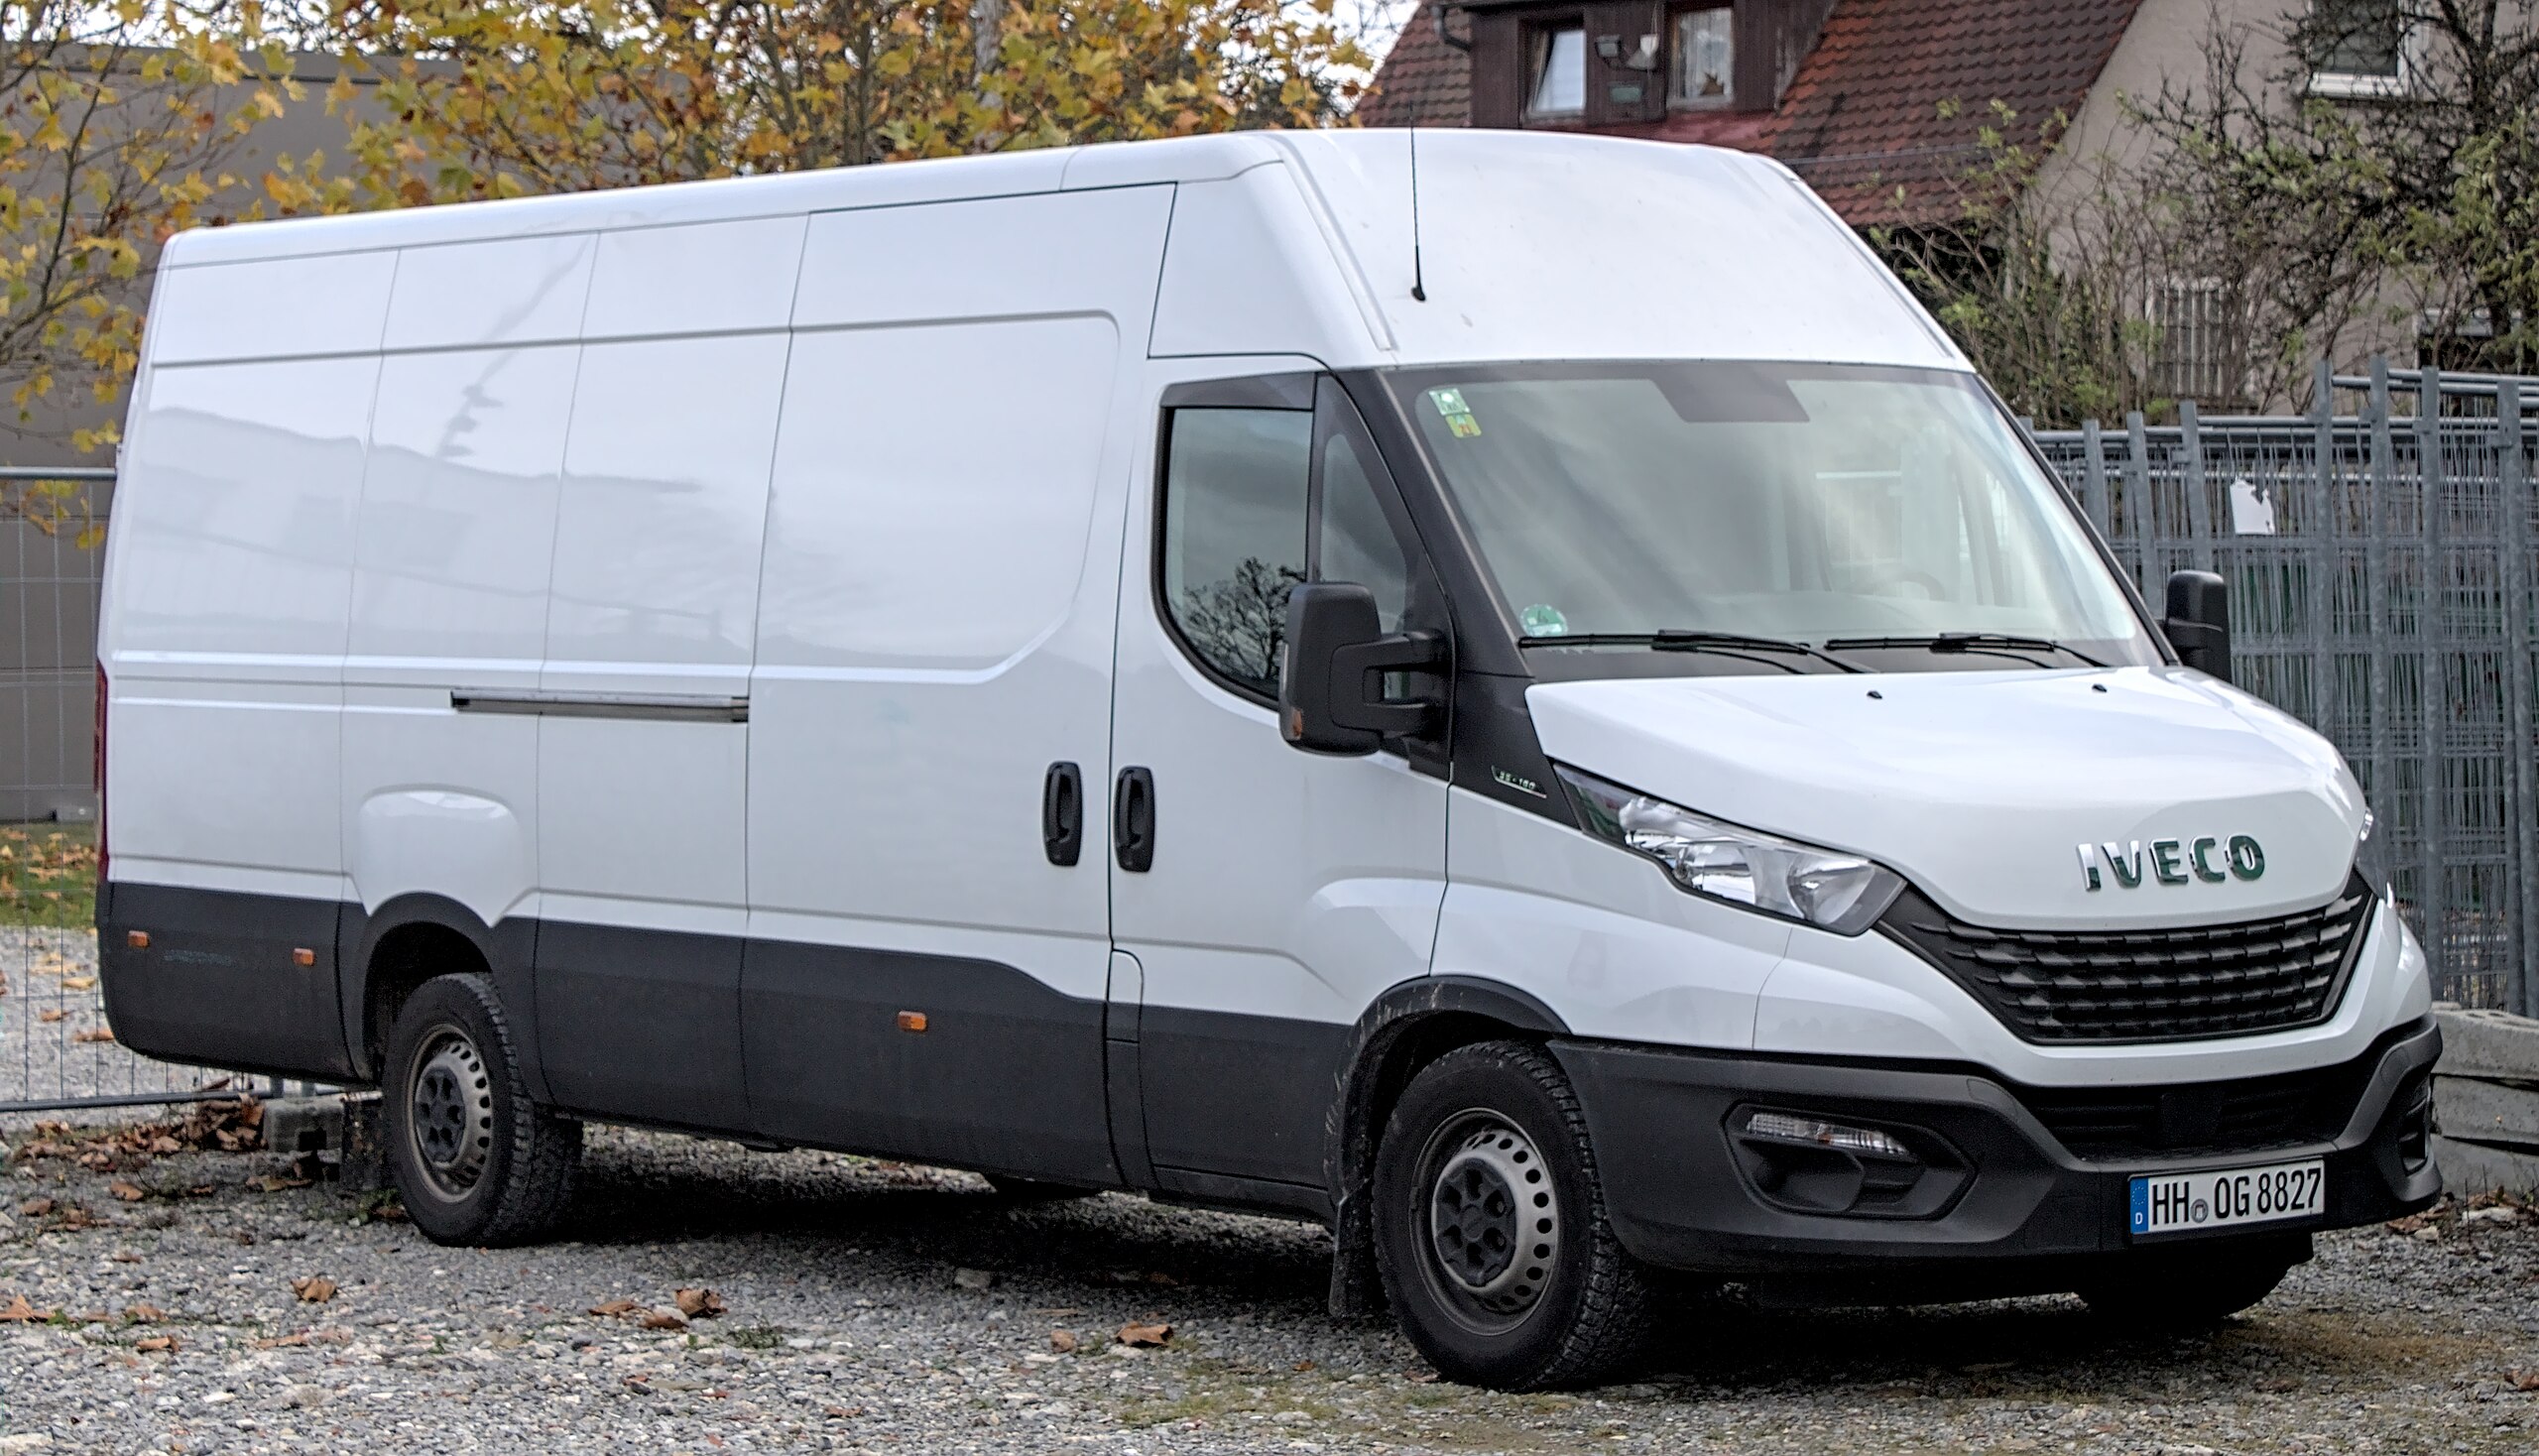 File:Iveco Daily (2014) IMG 5686.jpg - Wikipedia